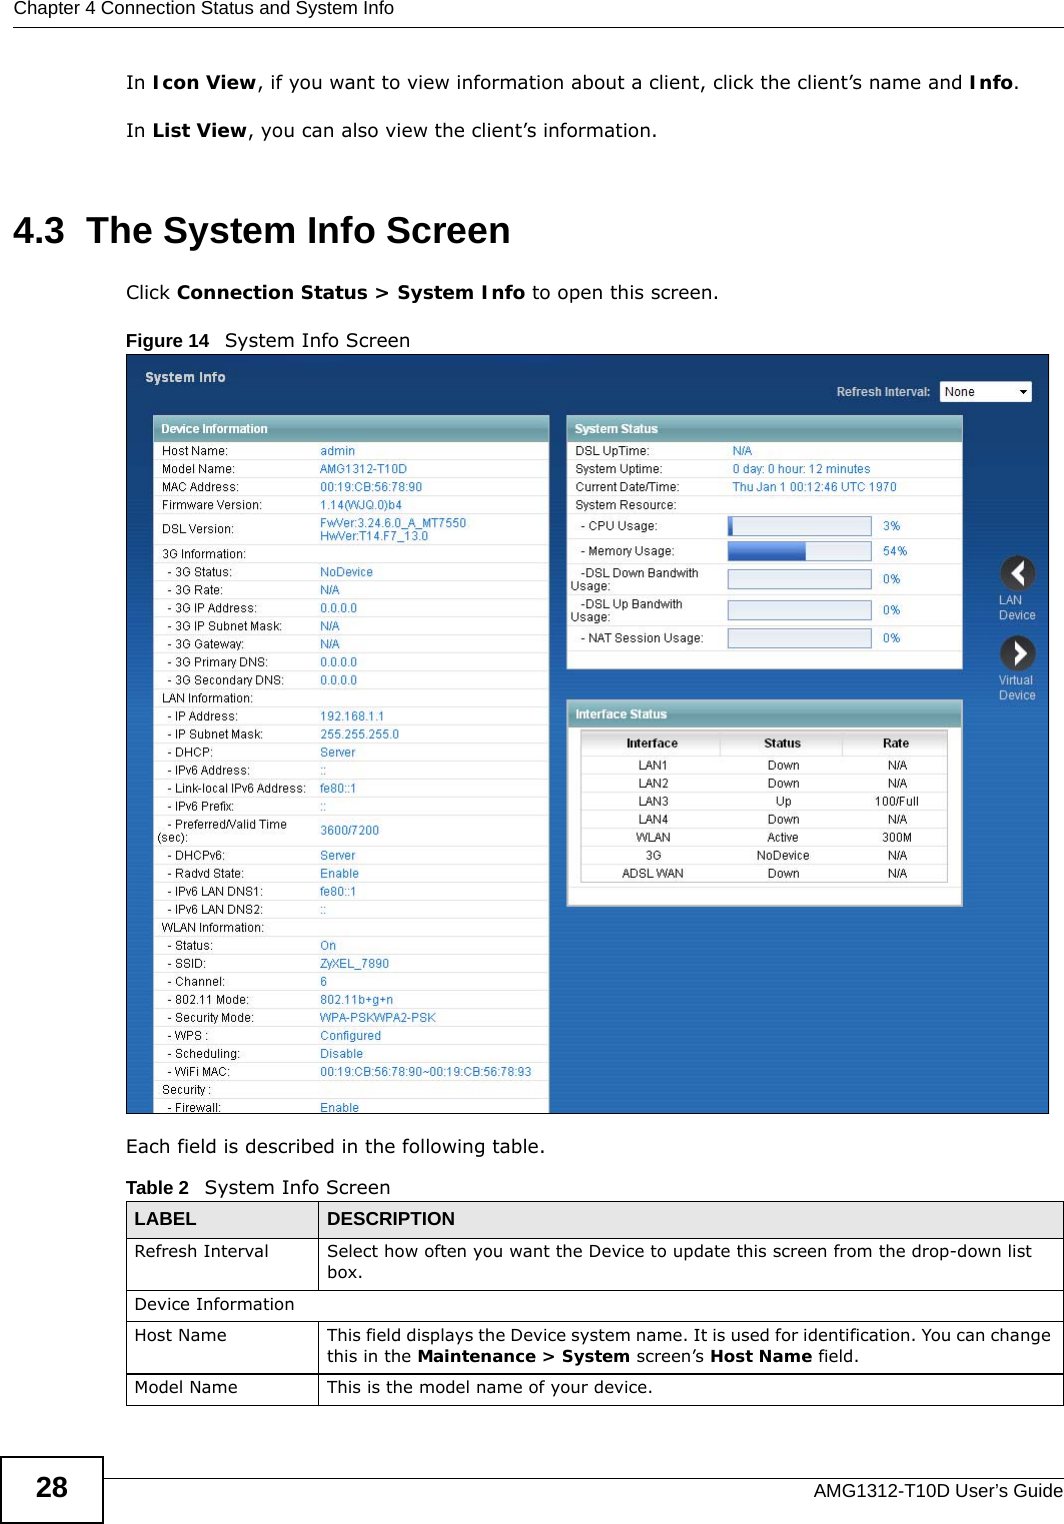 Chapter 4 Connection Status and System InfoAMG1312-T10D User’s Guide28In Icon View, if you want to view information about a client, click the client’s name and Info. In List View, you can also view the client’s information.4.3  The System Info ScreenClick Connection Status &gt; System Info to open this screen. Figure 14   System Info Screen Each field is described in the following table.Table 2   System Info ScreenLABEL DESCRIPTIONRefresh Interval Select how often you want the Device to update this screen from the drop-down list box.Device InformationHost Name This field displays the Device system name. It is used for identification. You can change this in the Maintenance &gt; System screen’s Host Name field.Model Name  This is the model name of your device.